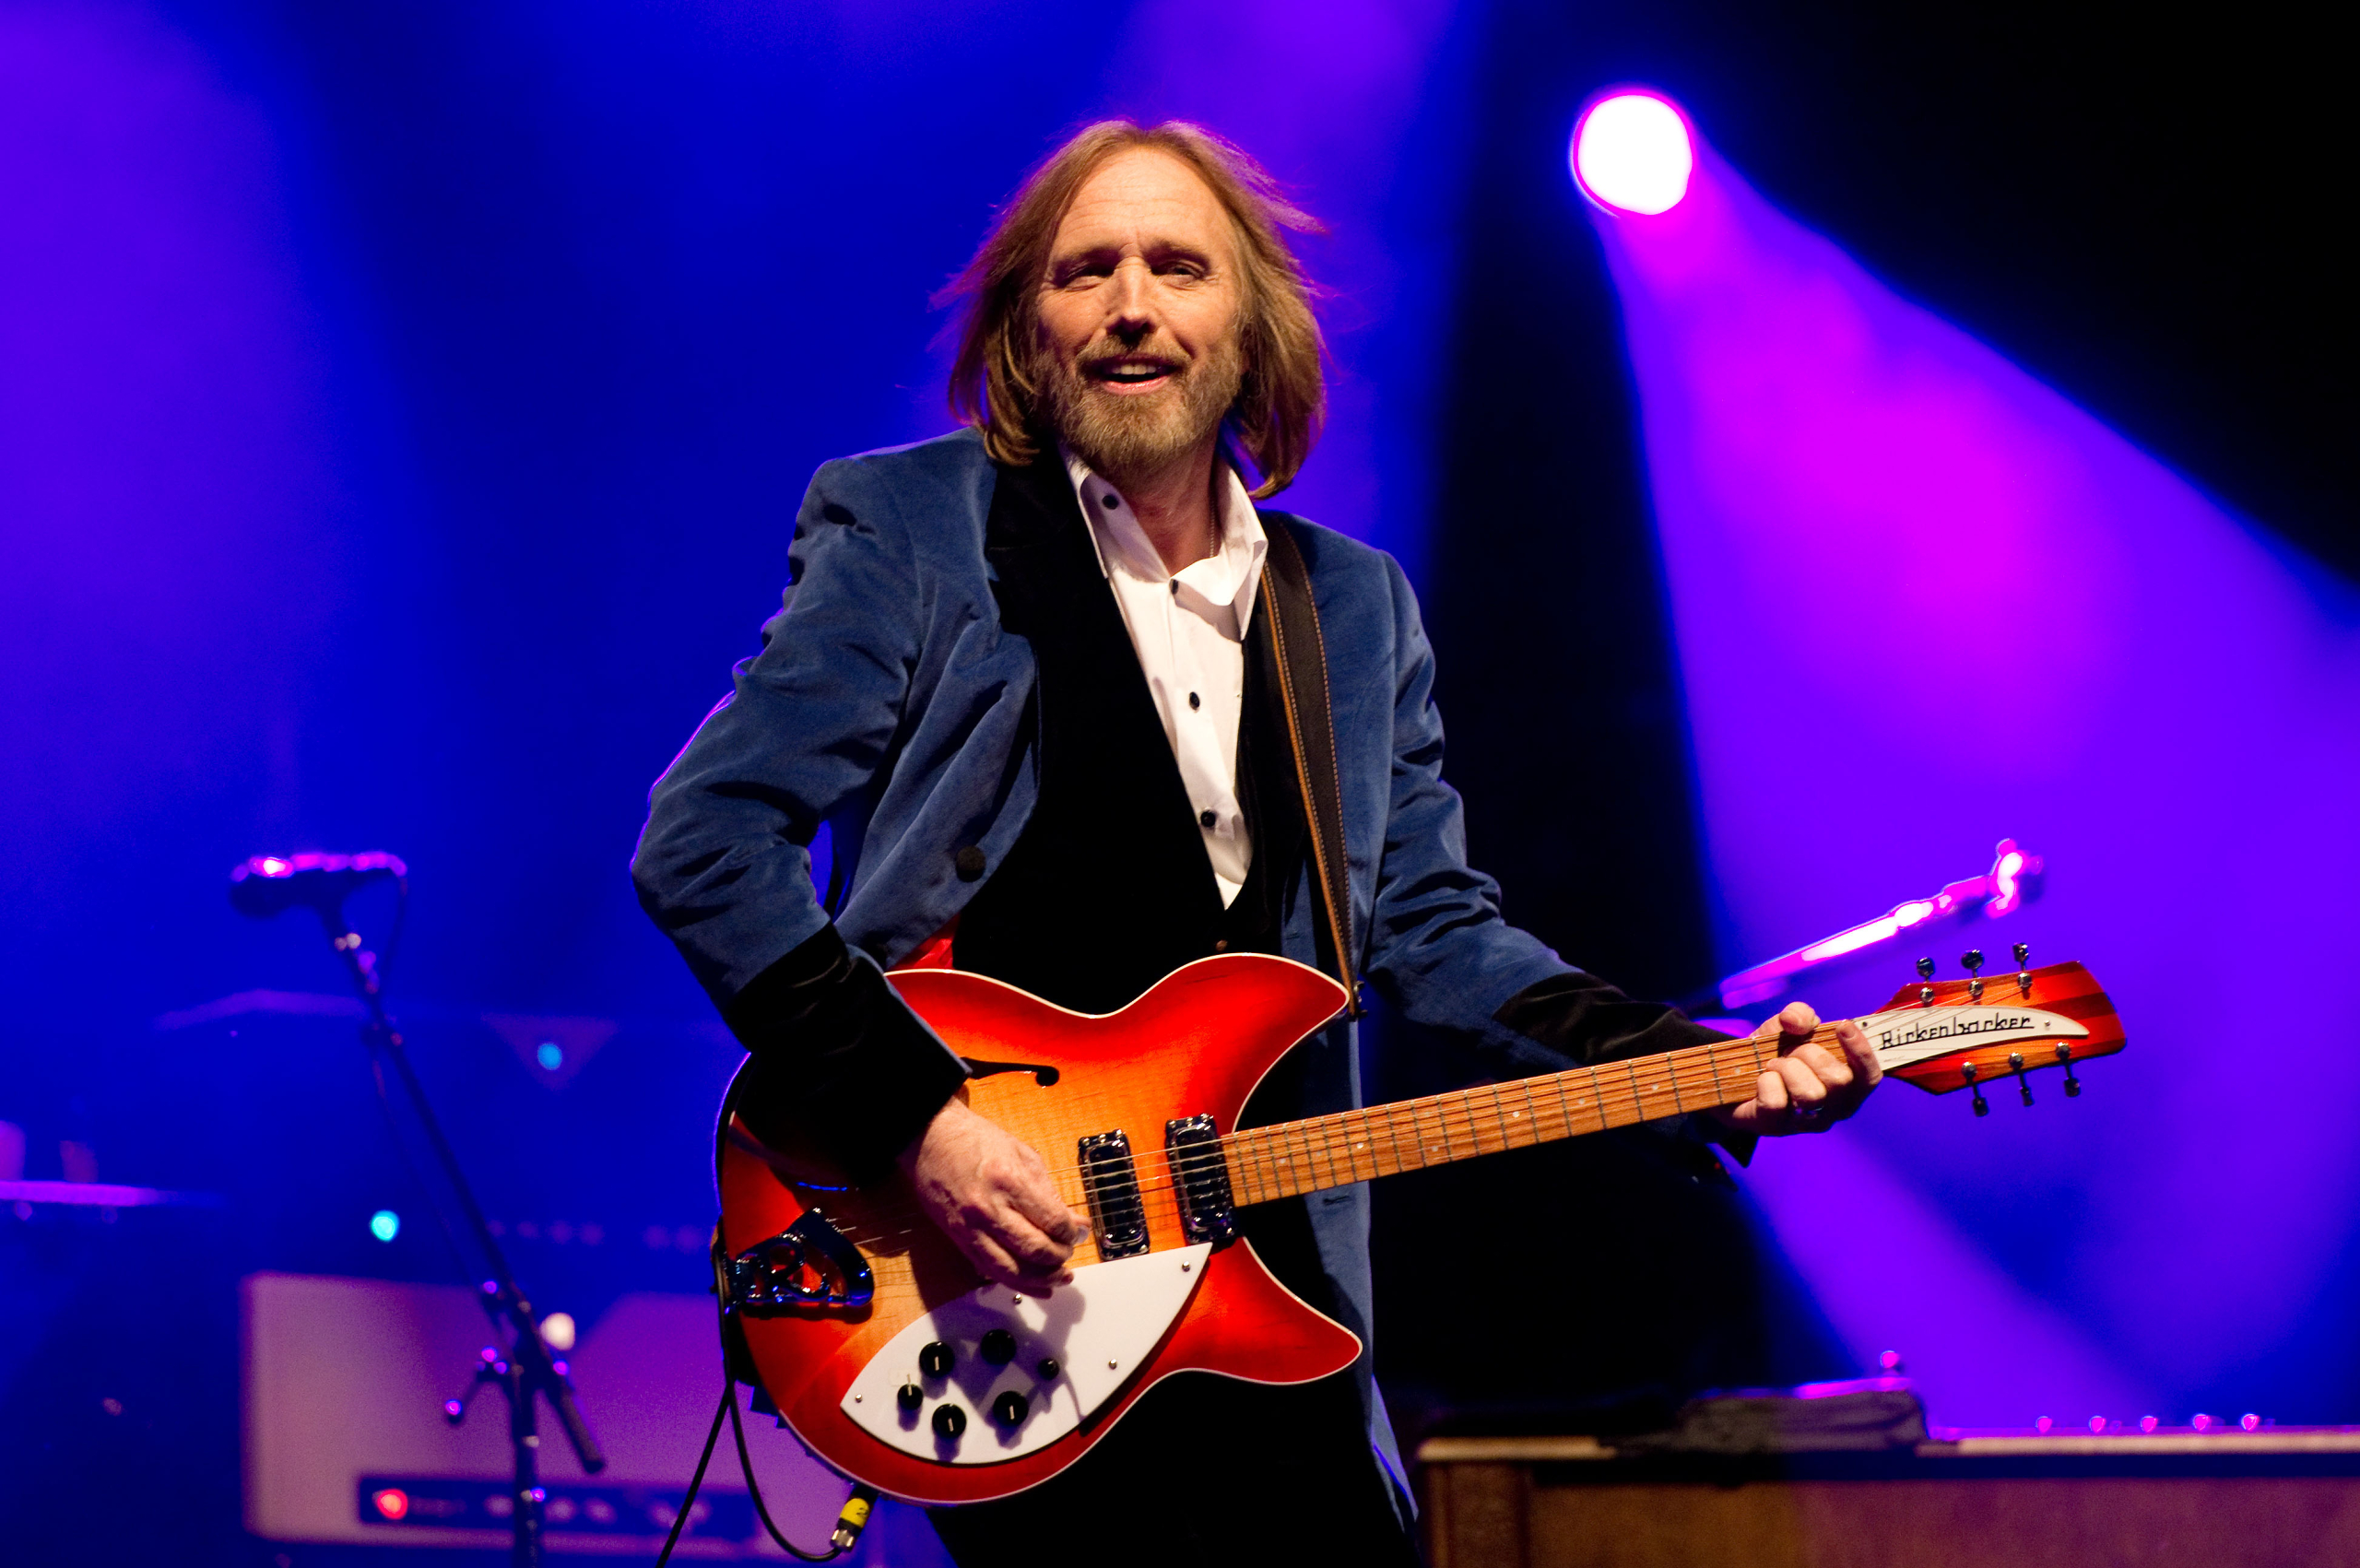 Watch never before seen LIVE Tom Petty footage!